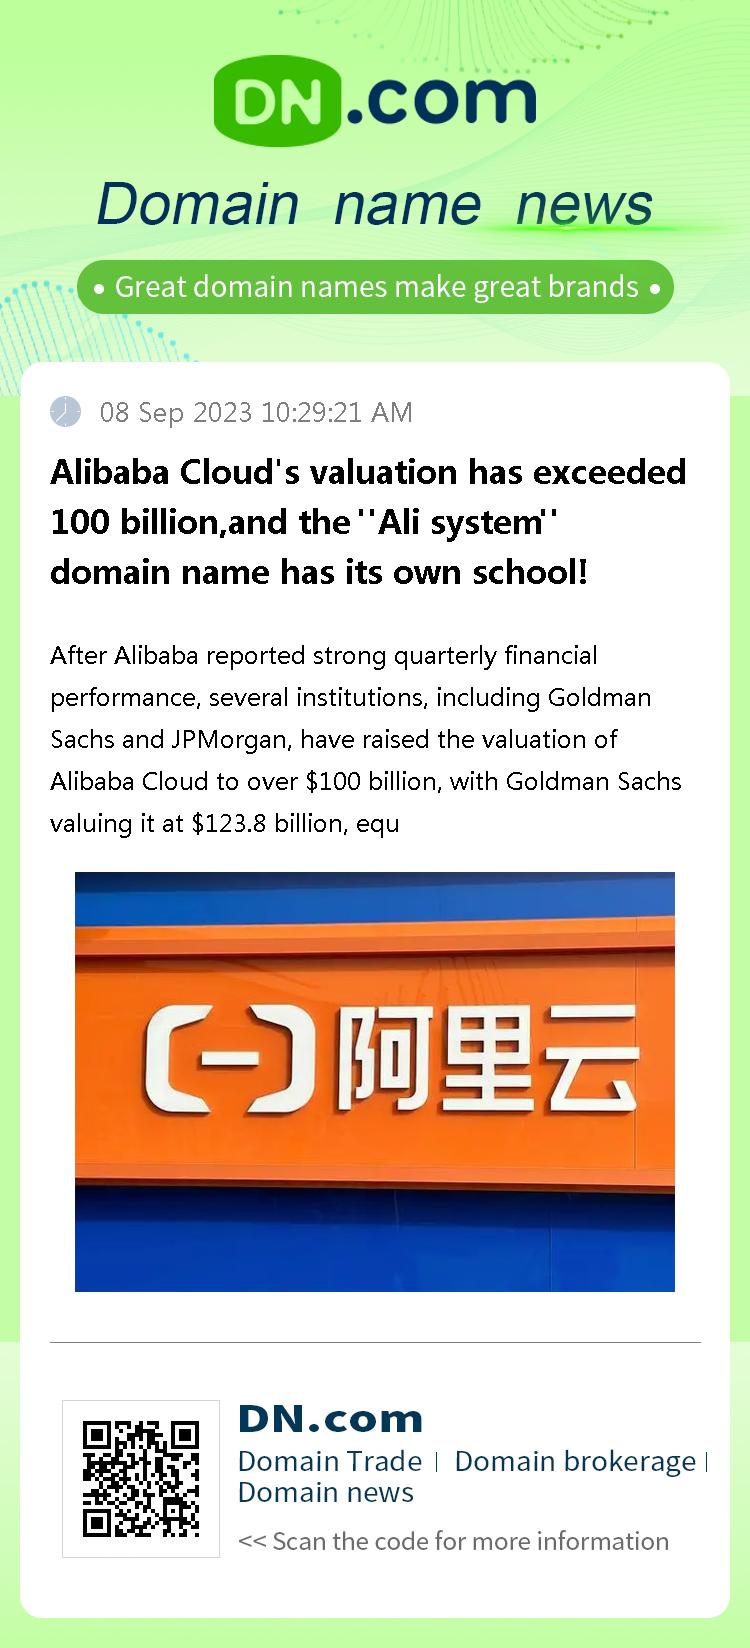 Alibaba Cloud's valuation has exceeded 100 billion,and the 